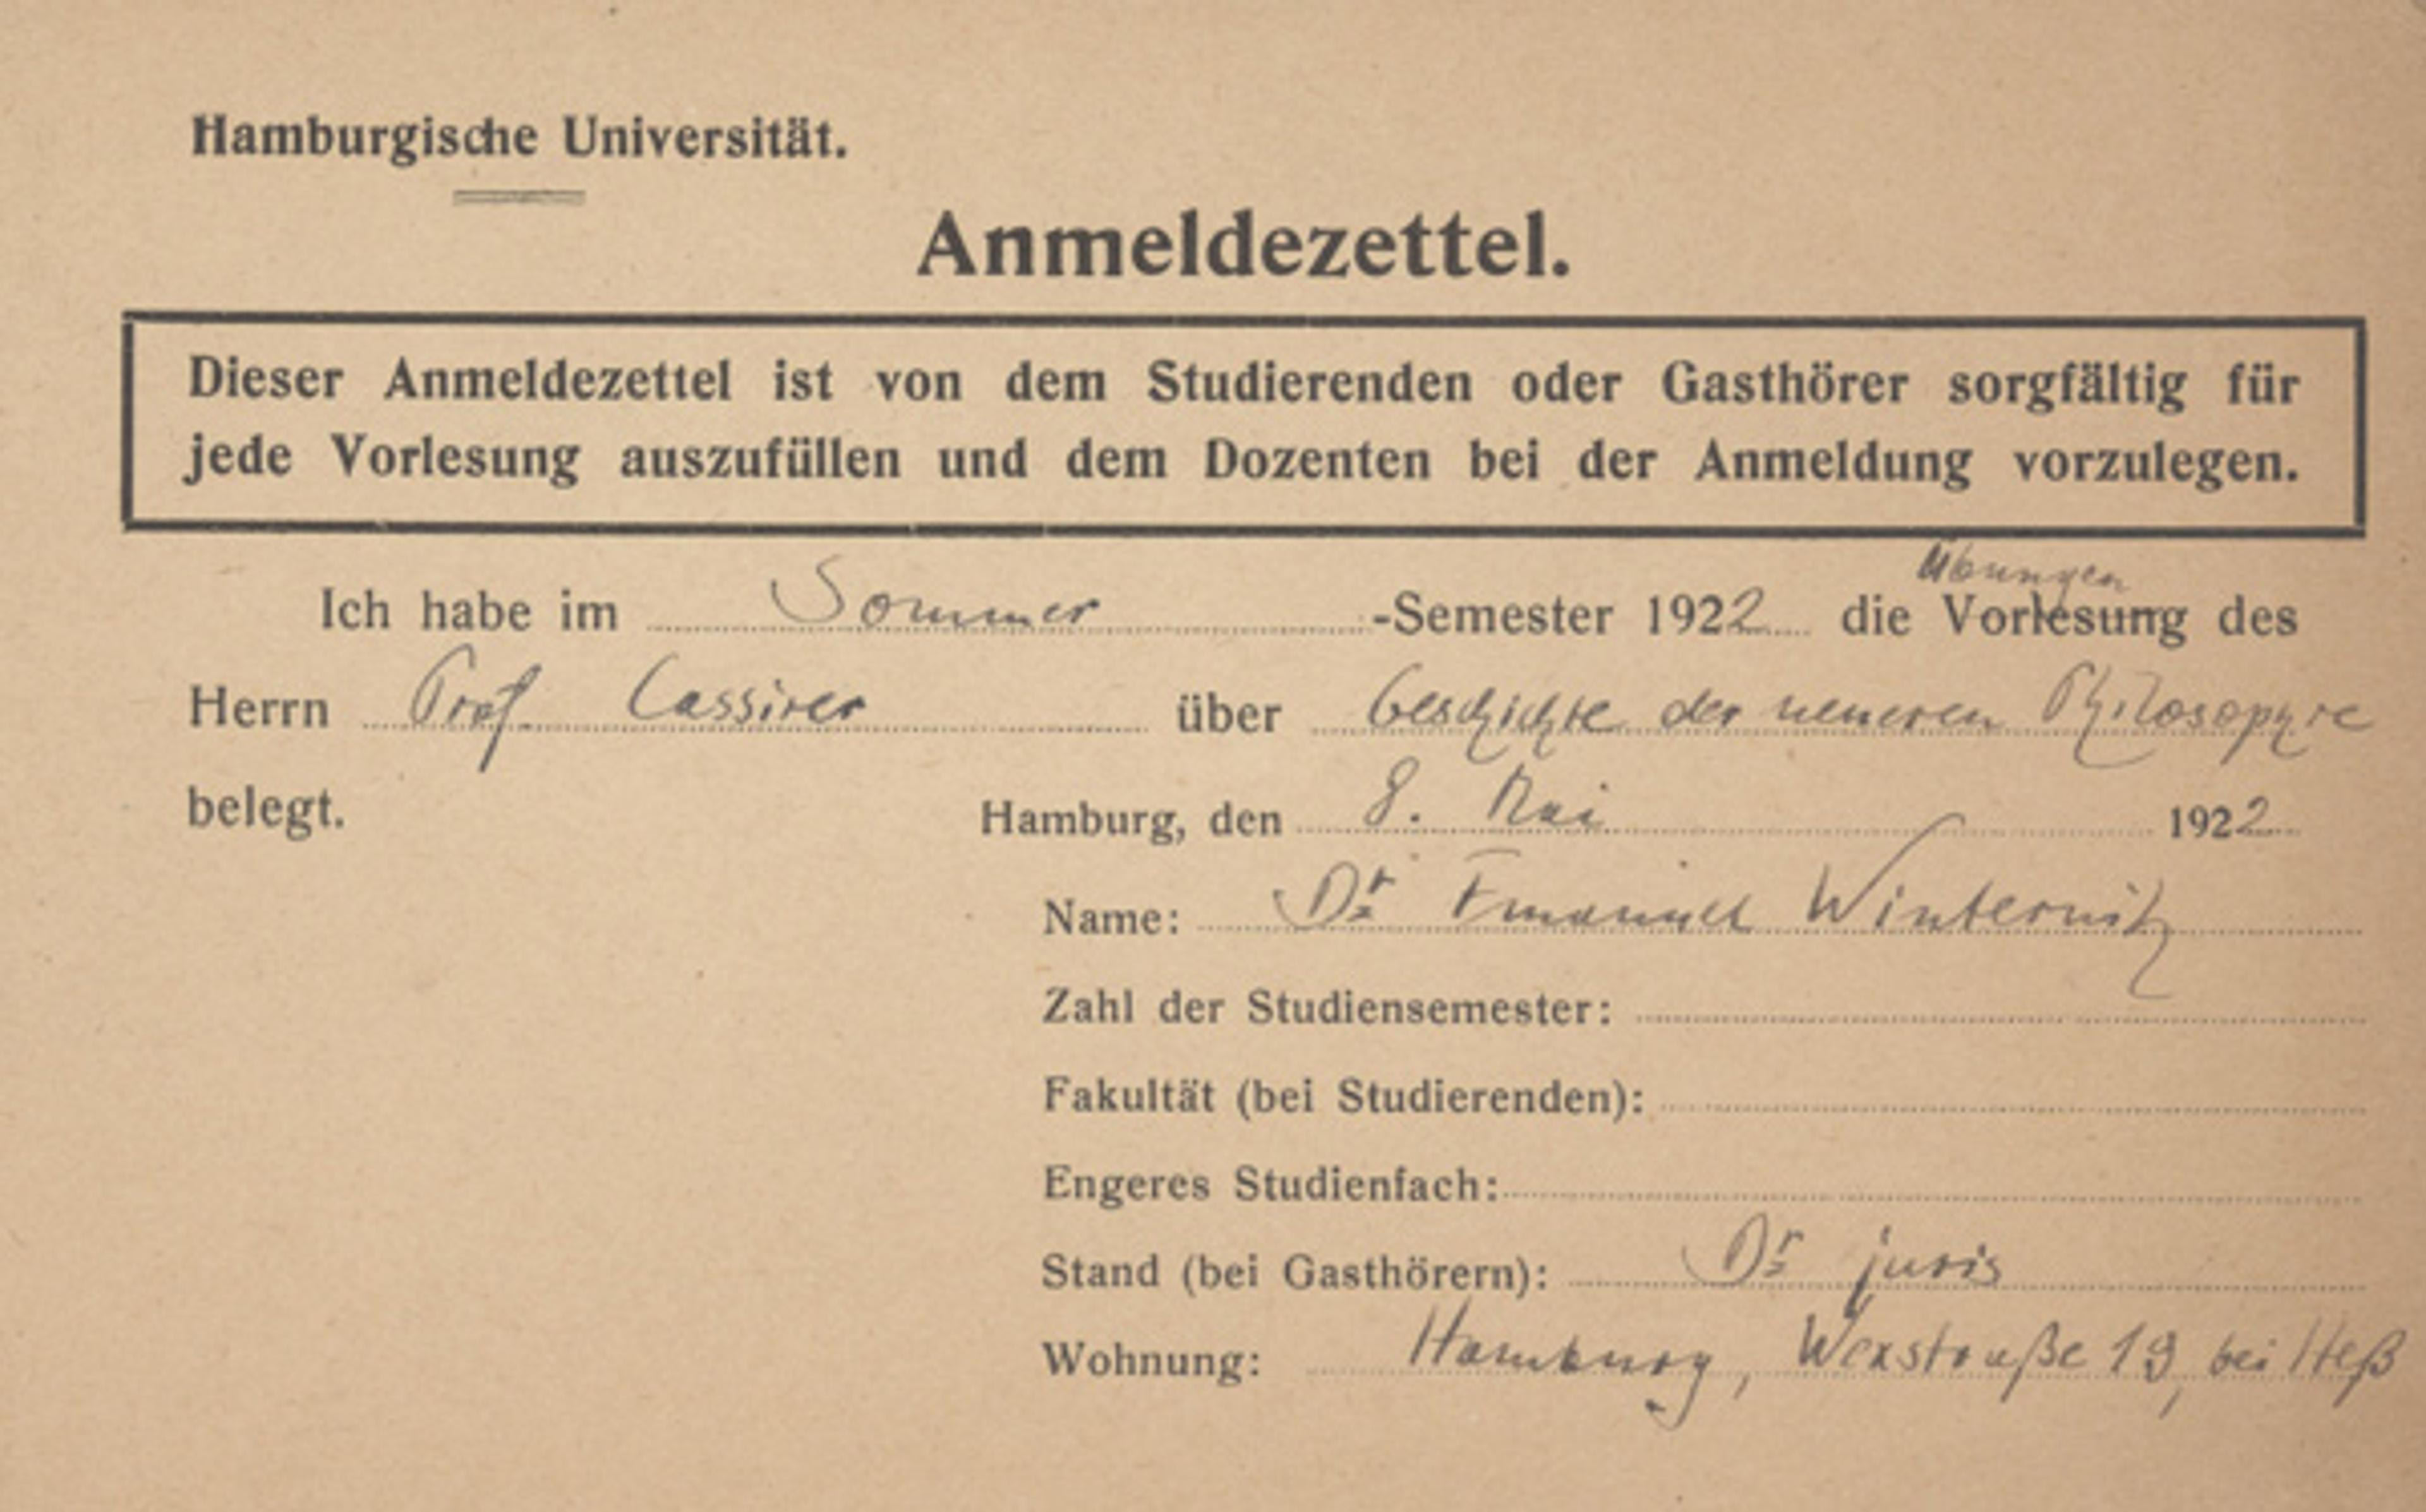 Winternitz's 1922 University of Hamburg registration for a seminar with the eminent philosopher Ernst Casirer, who also emigrated to the United States and maintained correspondence with Winternitz until his death in 1945. This class prompted Winternitz's lifelong interest in the symbolism of art and music.